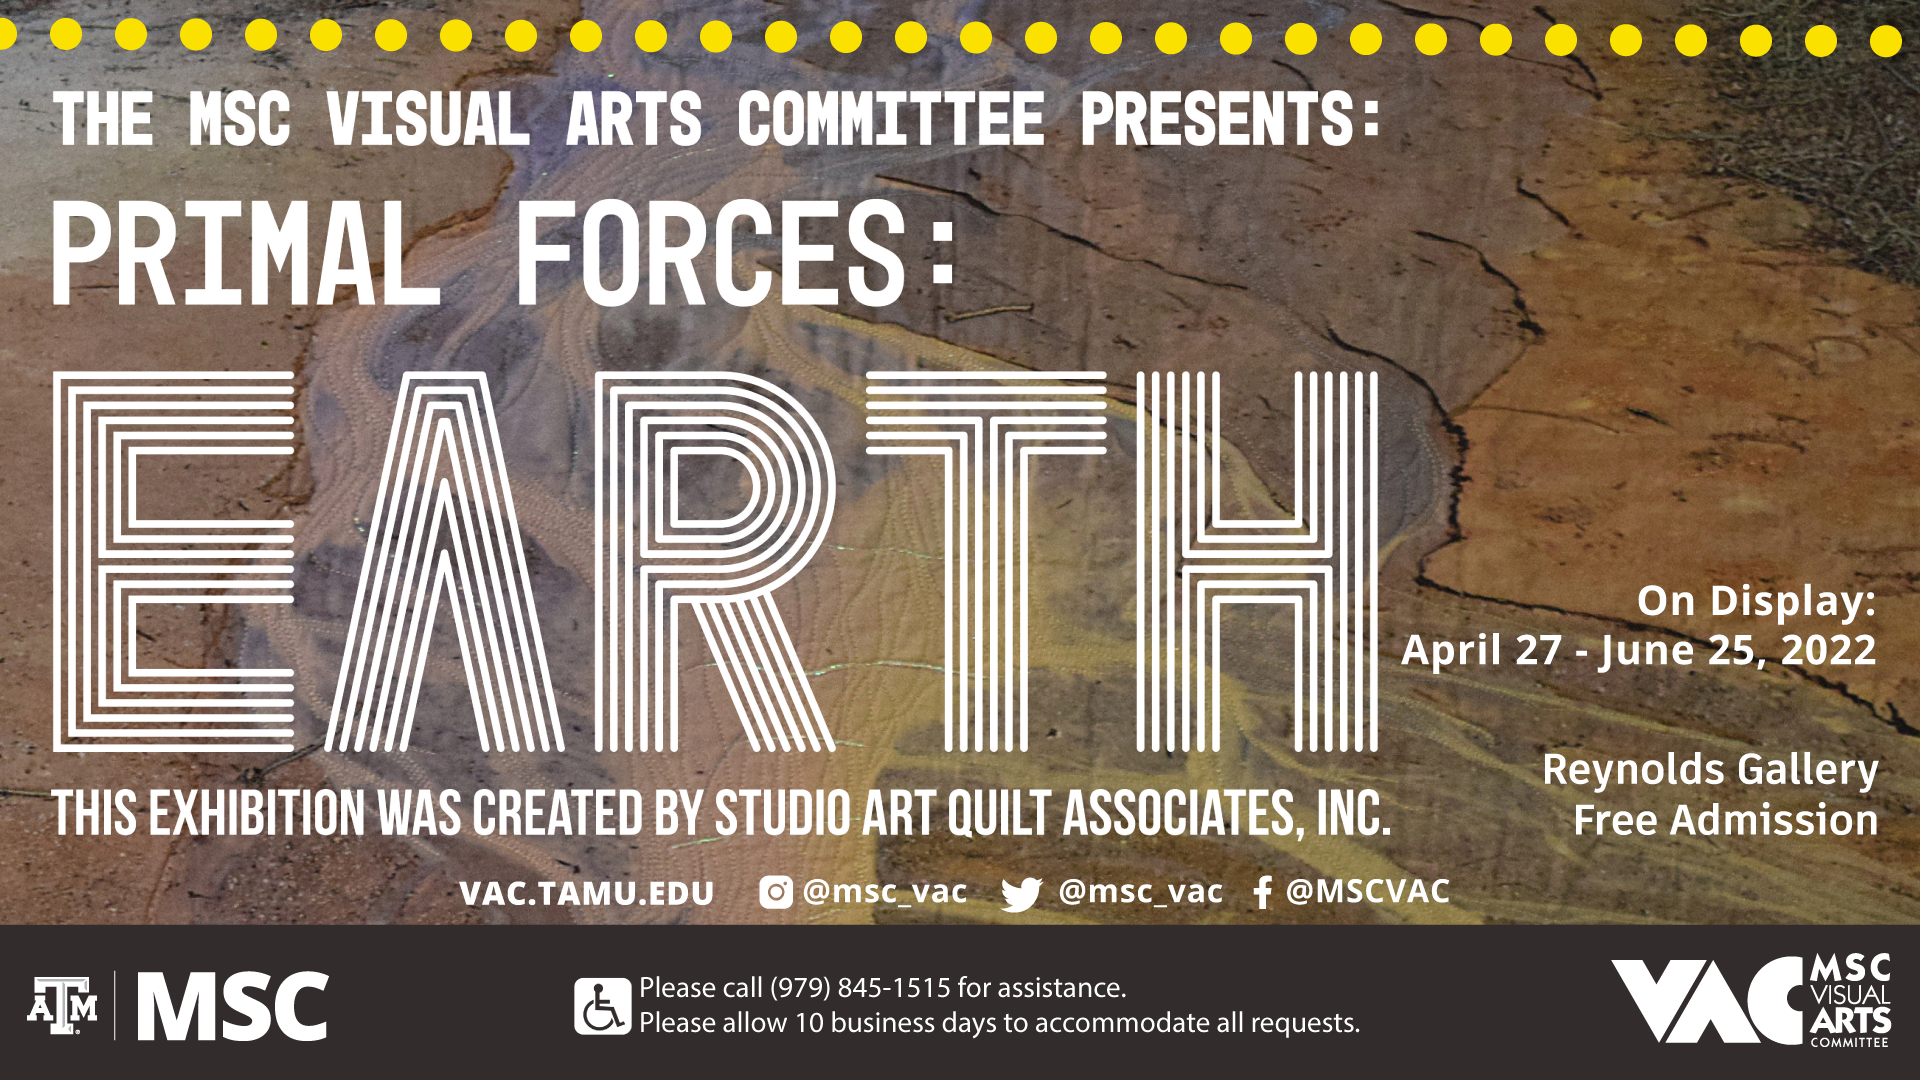 The MSC Visual Arts Committee Presents: Primal Forces: Earth, This exhibition was created by Studio Art Quilt Associates, Inc. On Display: April 27 to June 25, 2022. At Reynolds Gallery, Free Admission. Website: vac.tamu.edu. Instagram: @msc_vac, Twitter: @msc_vac, Facebook: @MSCVAC. Please call 979 845 1515 for assistance. Please allow 10 business days to accommodate all requests.